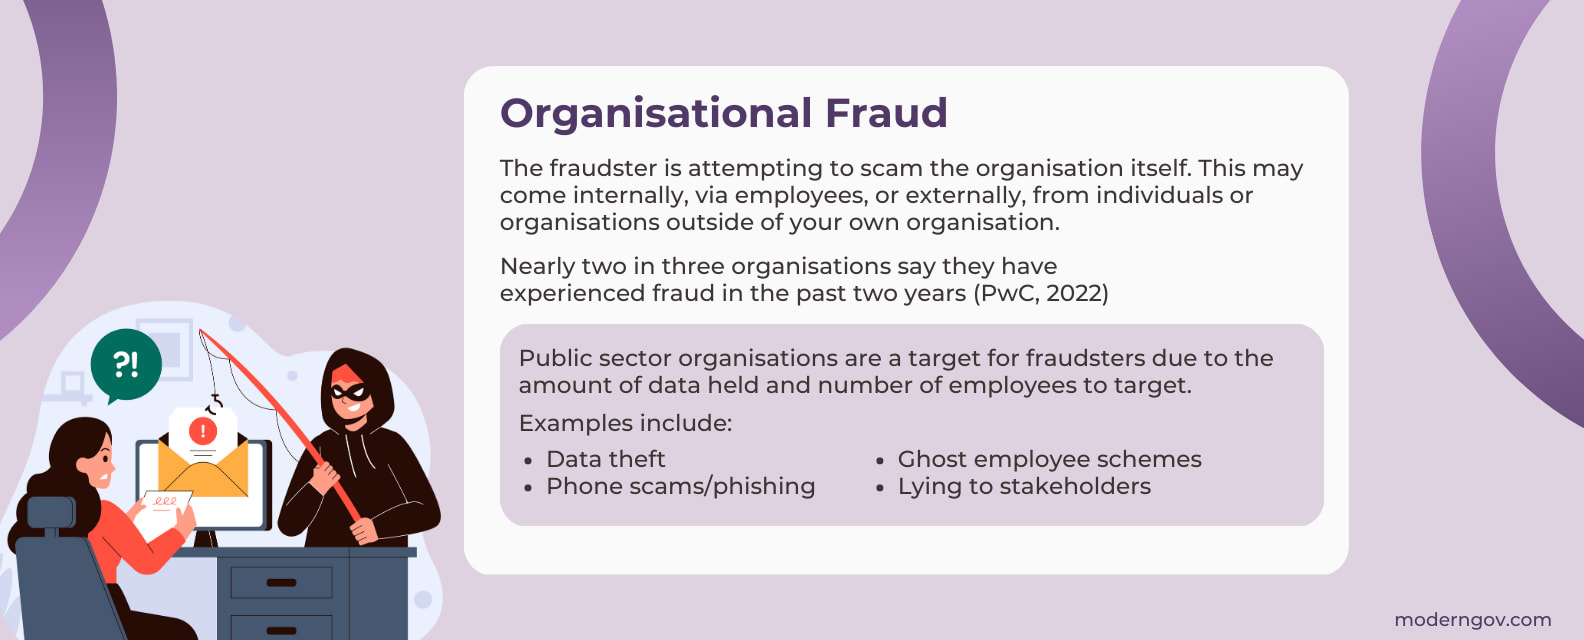 organisational fraud in the public sector